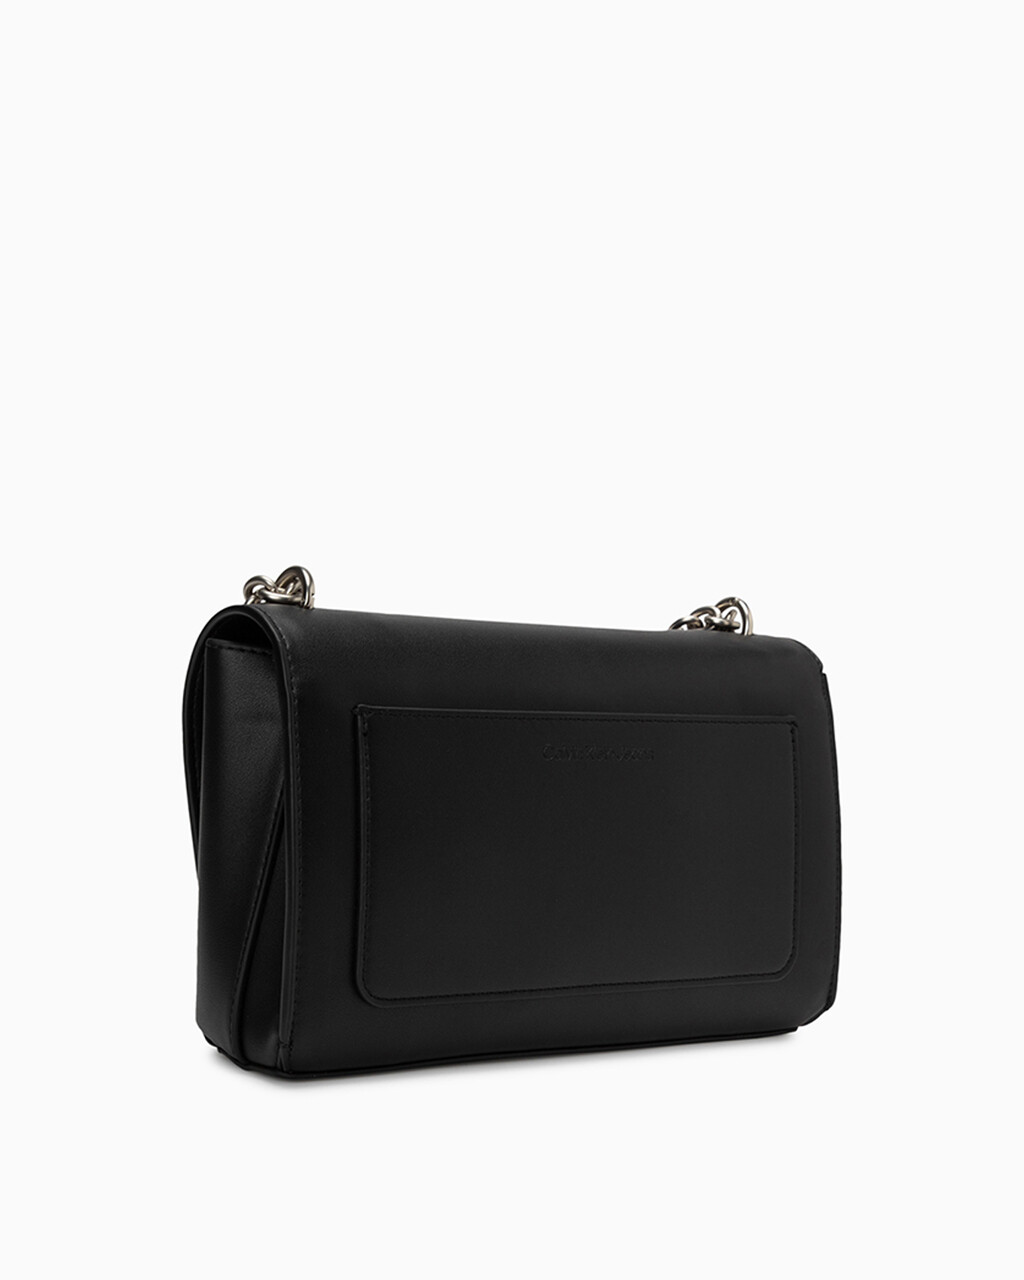 Sculpted Flap Bag With Chain, BLACK, hi-res